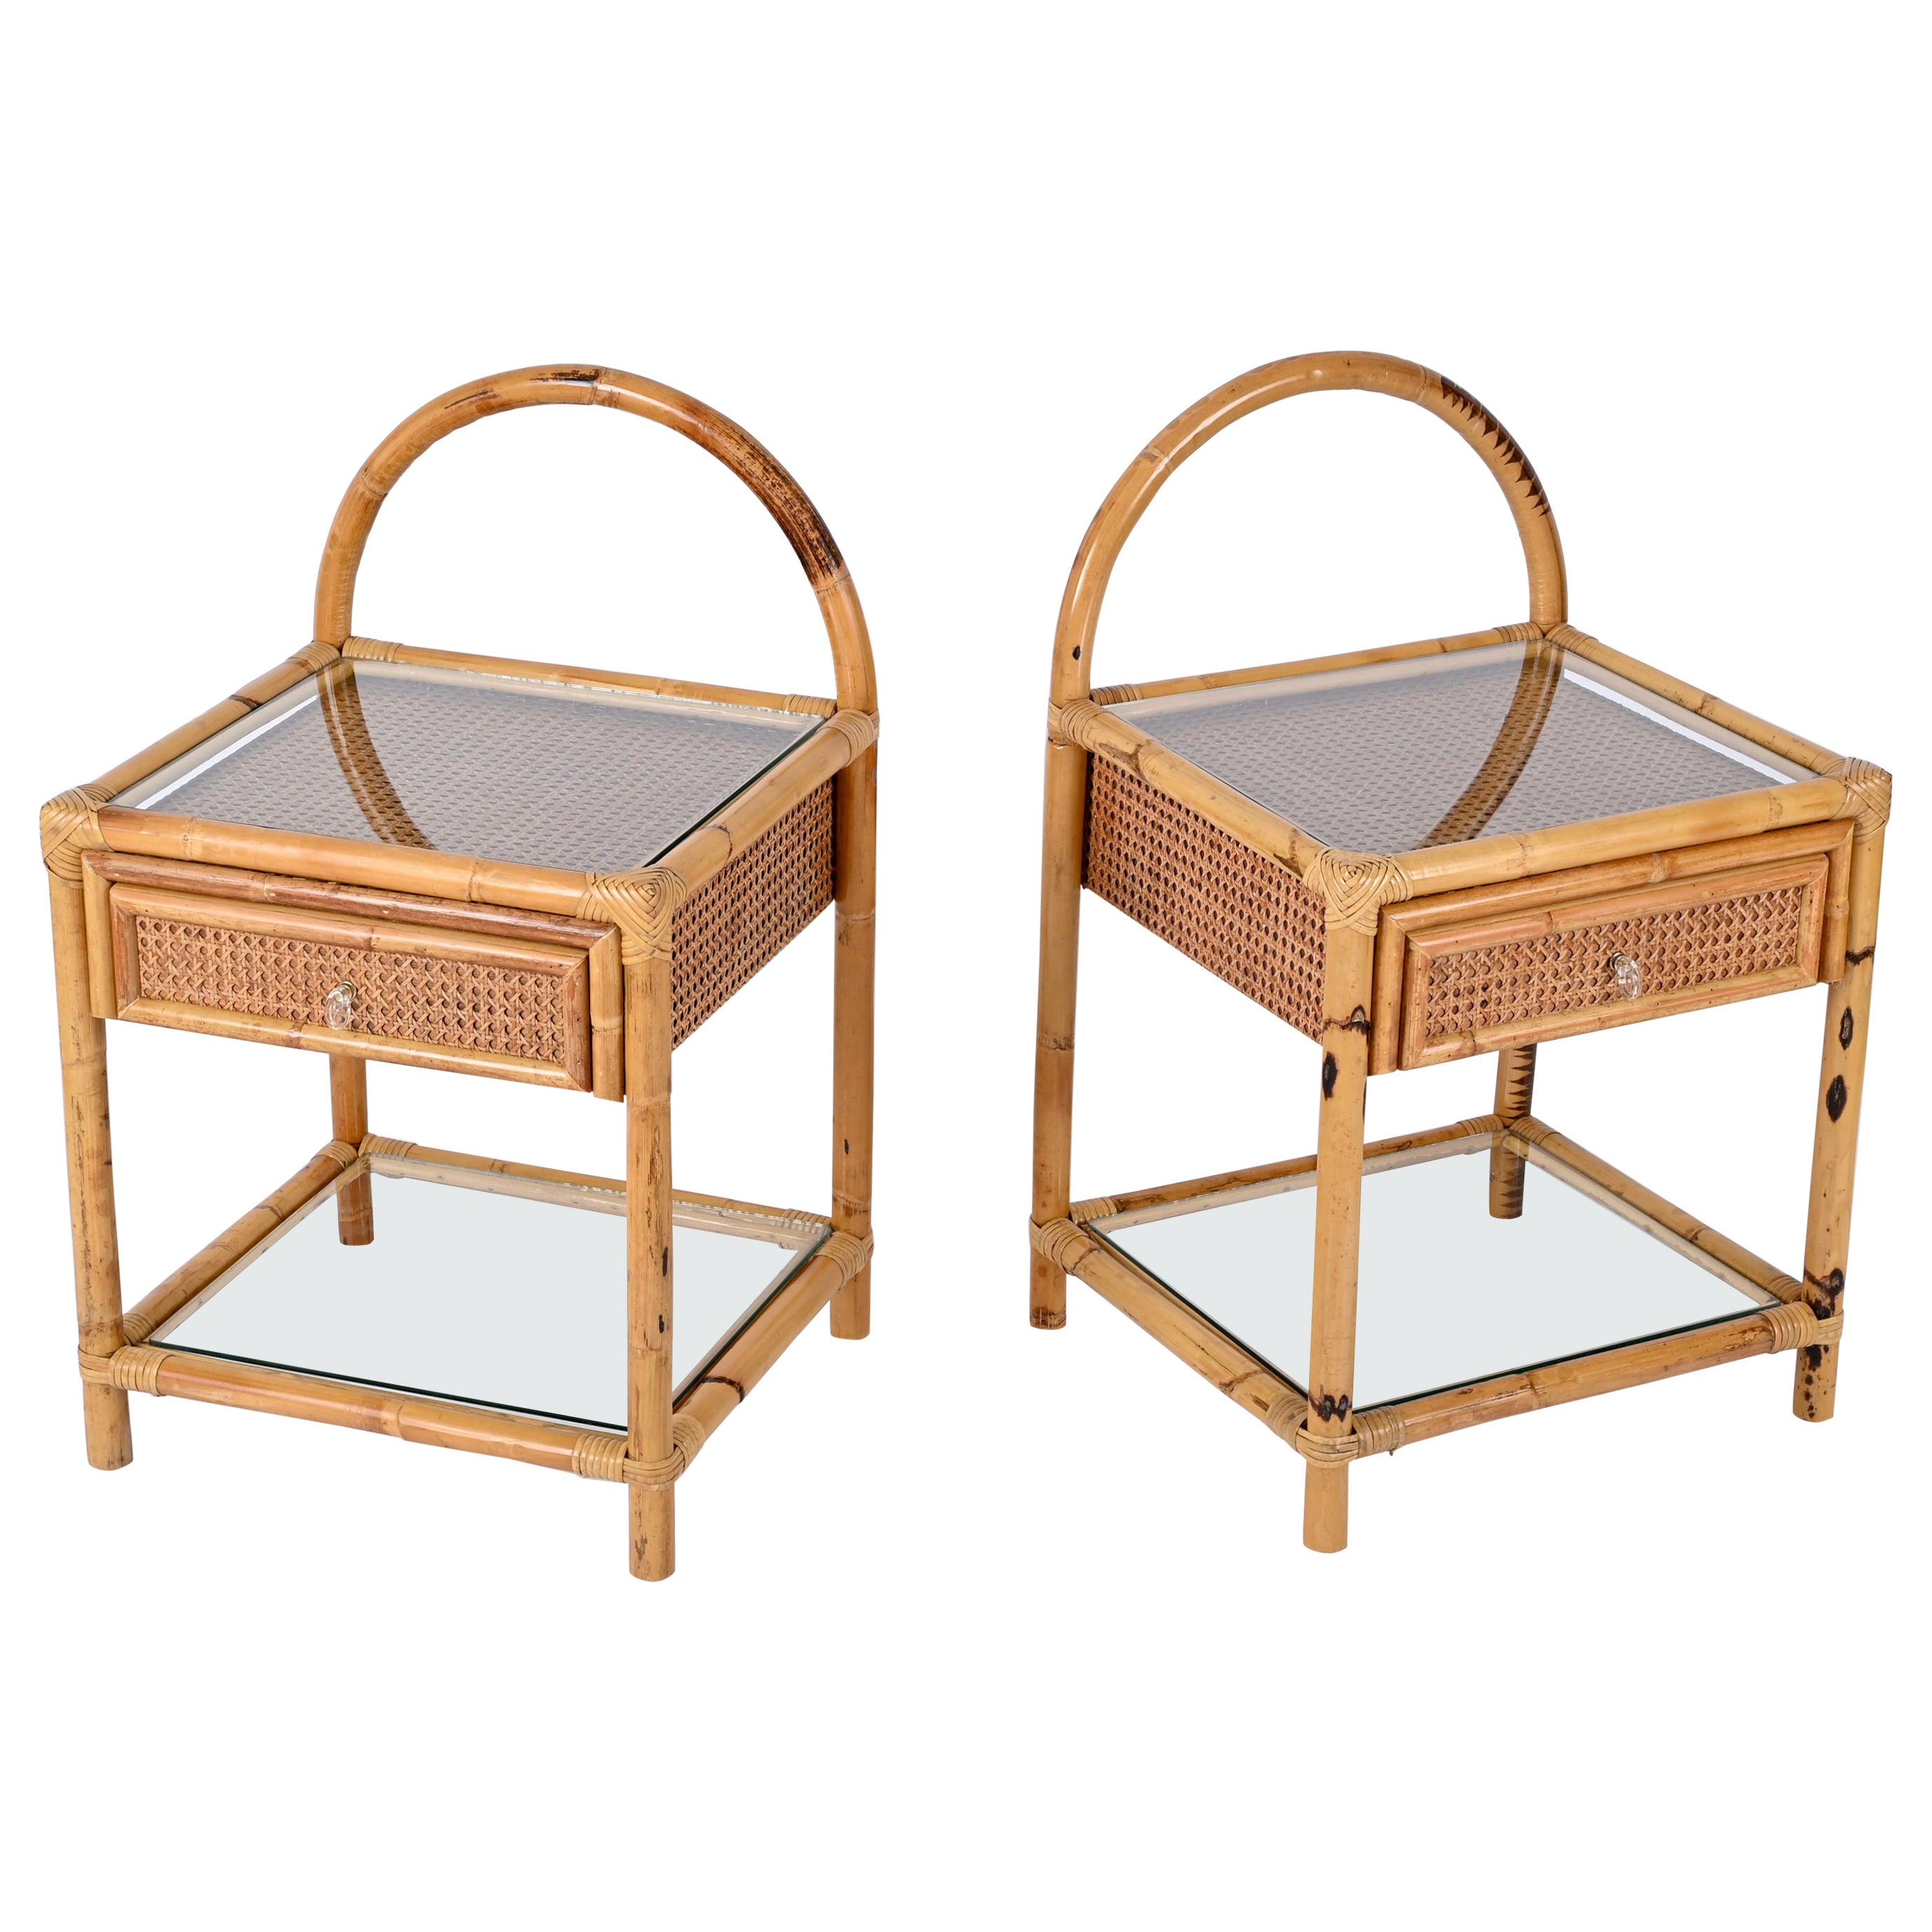 Pair of Mid-Century Bamboo, Rattan and Wicker Italian Bedside Tables, 1970s For Sale